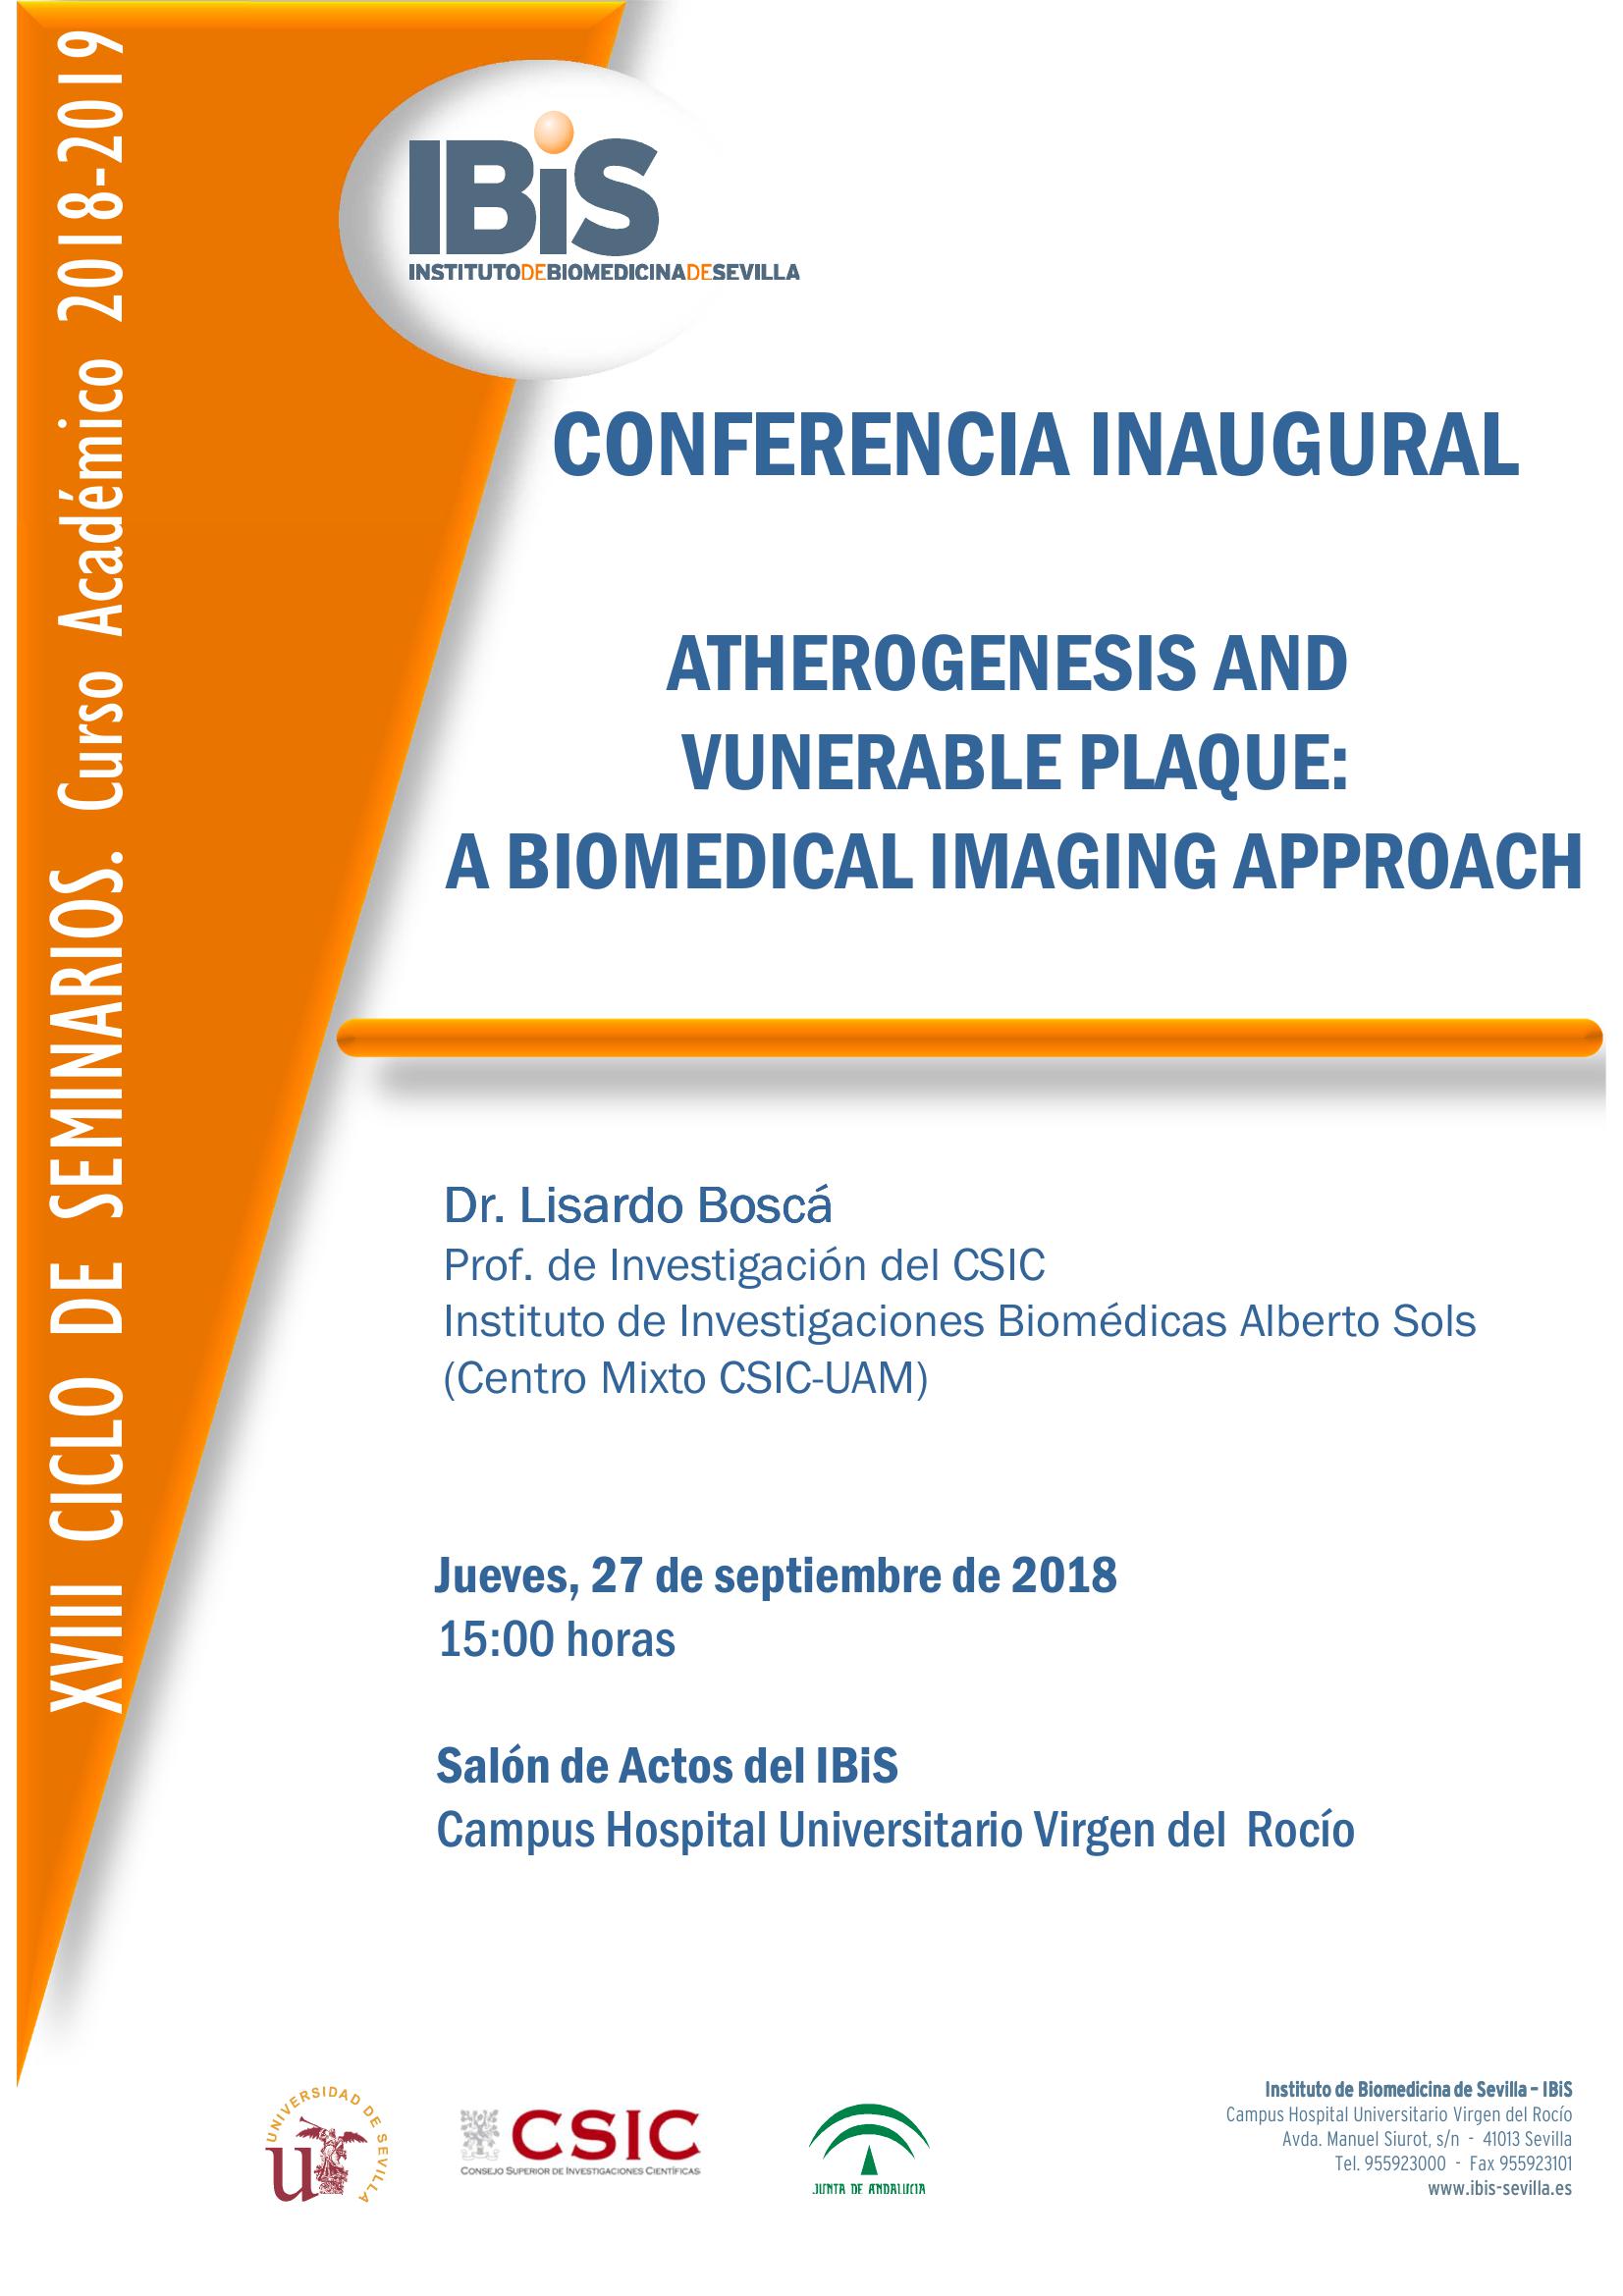 Poster: ATHEROGENESIS AND  VUNERABLE PLAQUE:  A BIOMEDICAL IMAGING APPROACH